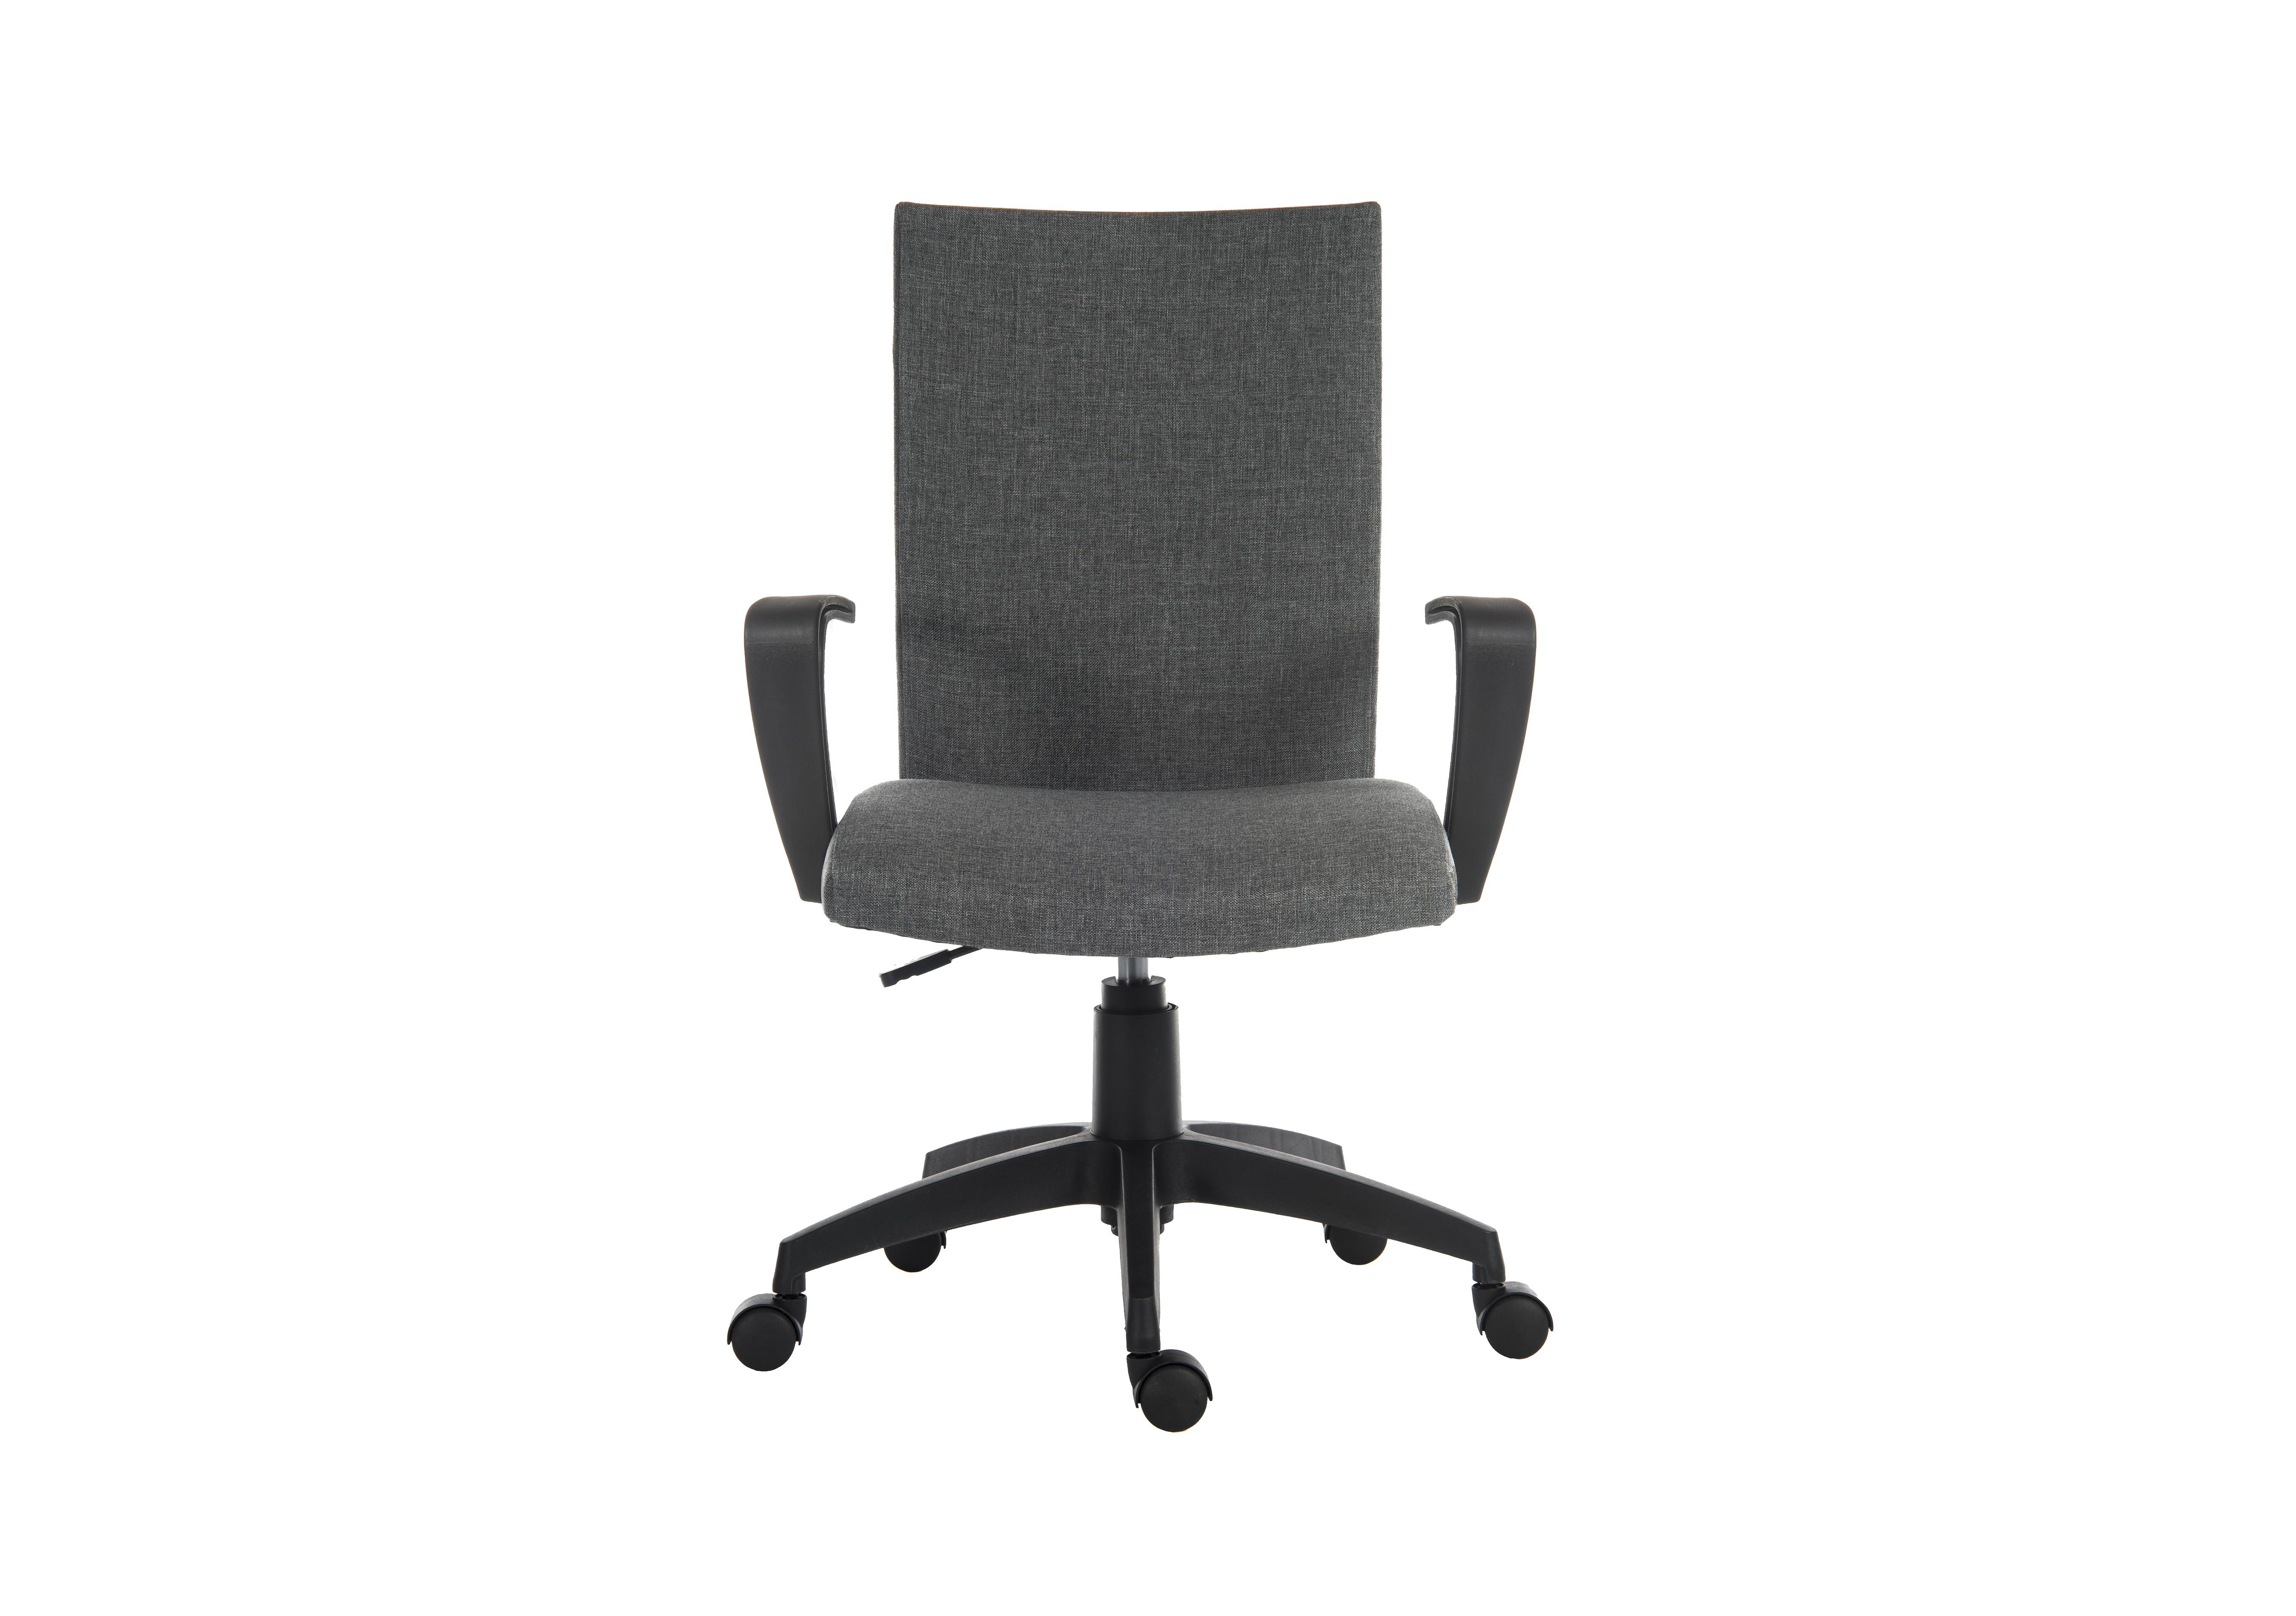 East River Work Chair in Grey on Furniture Village